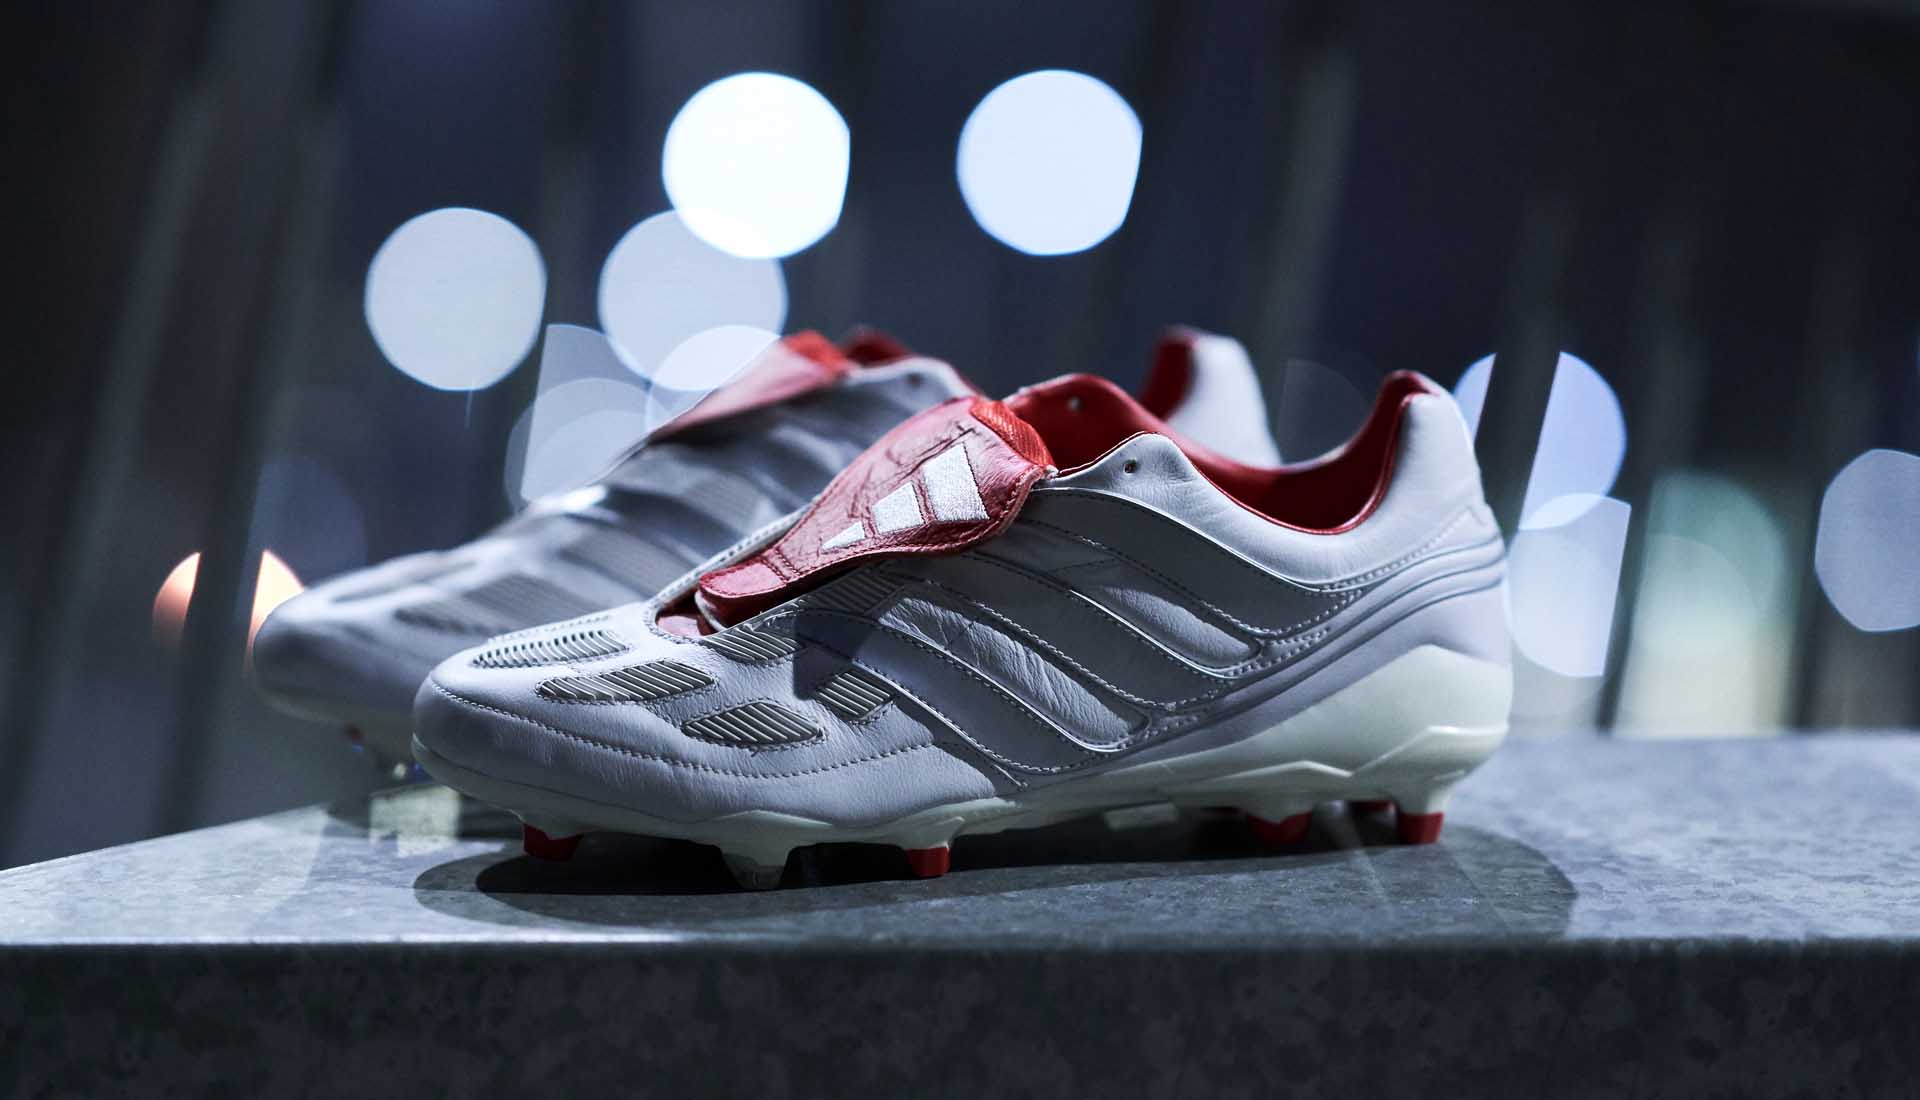 Adidas Predator boots have almost 30 years of legacy